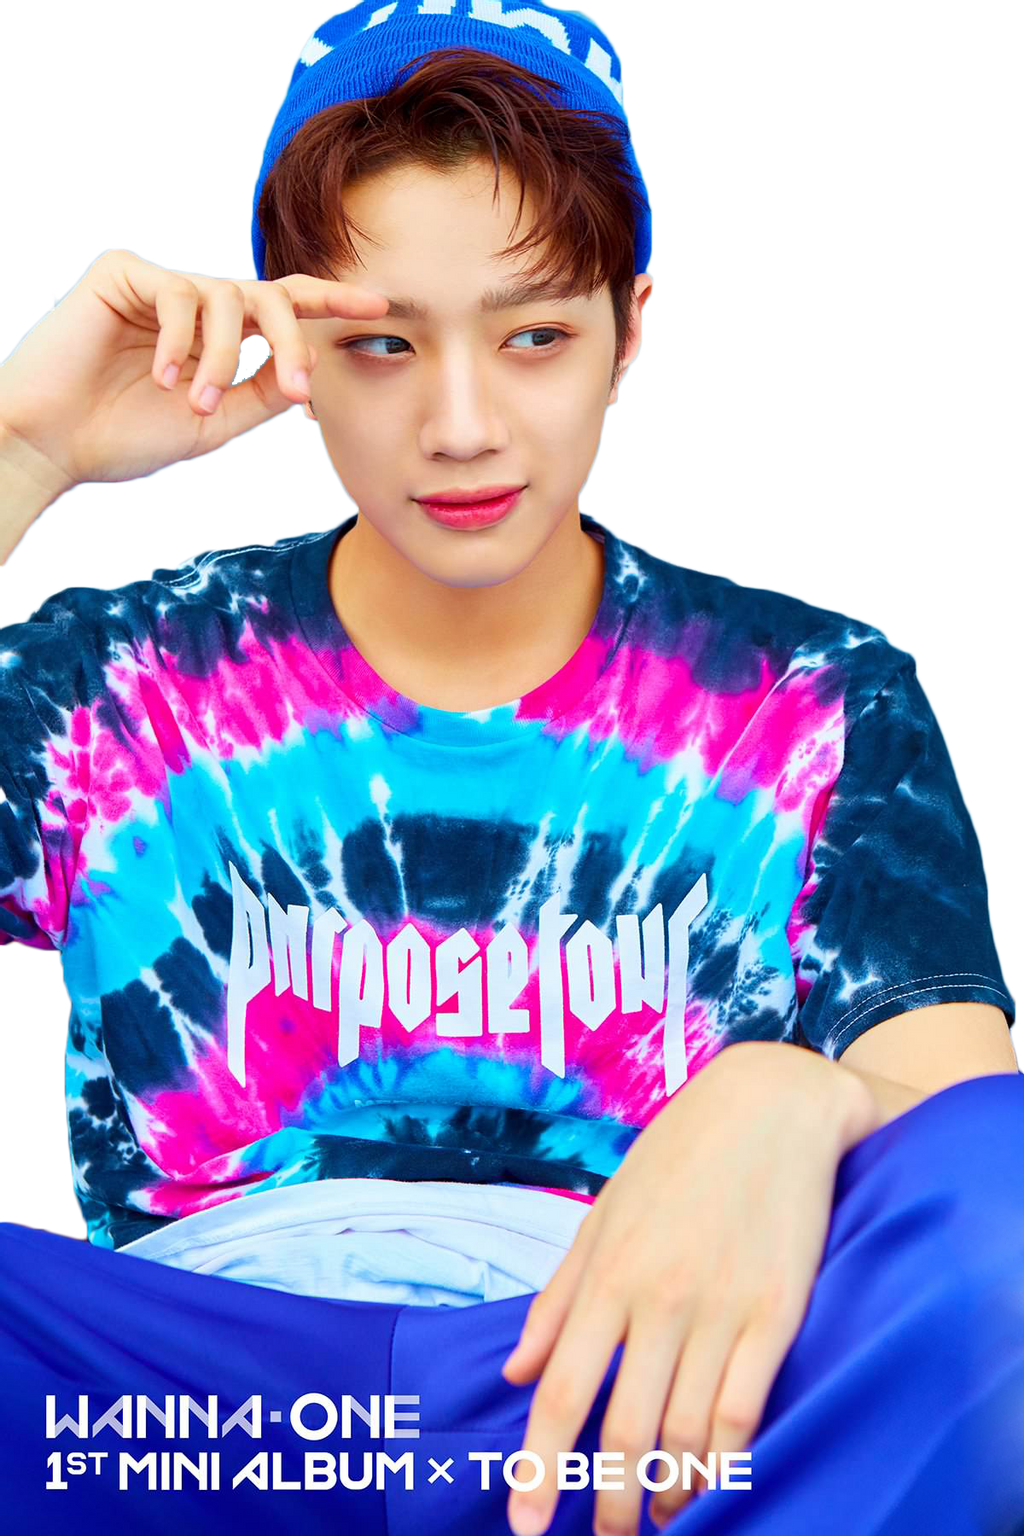 Lai Guanlin Wanna One PNG Transparent Image